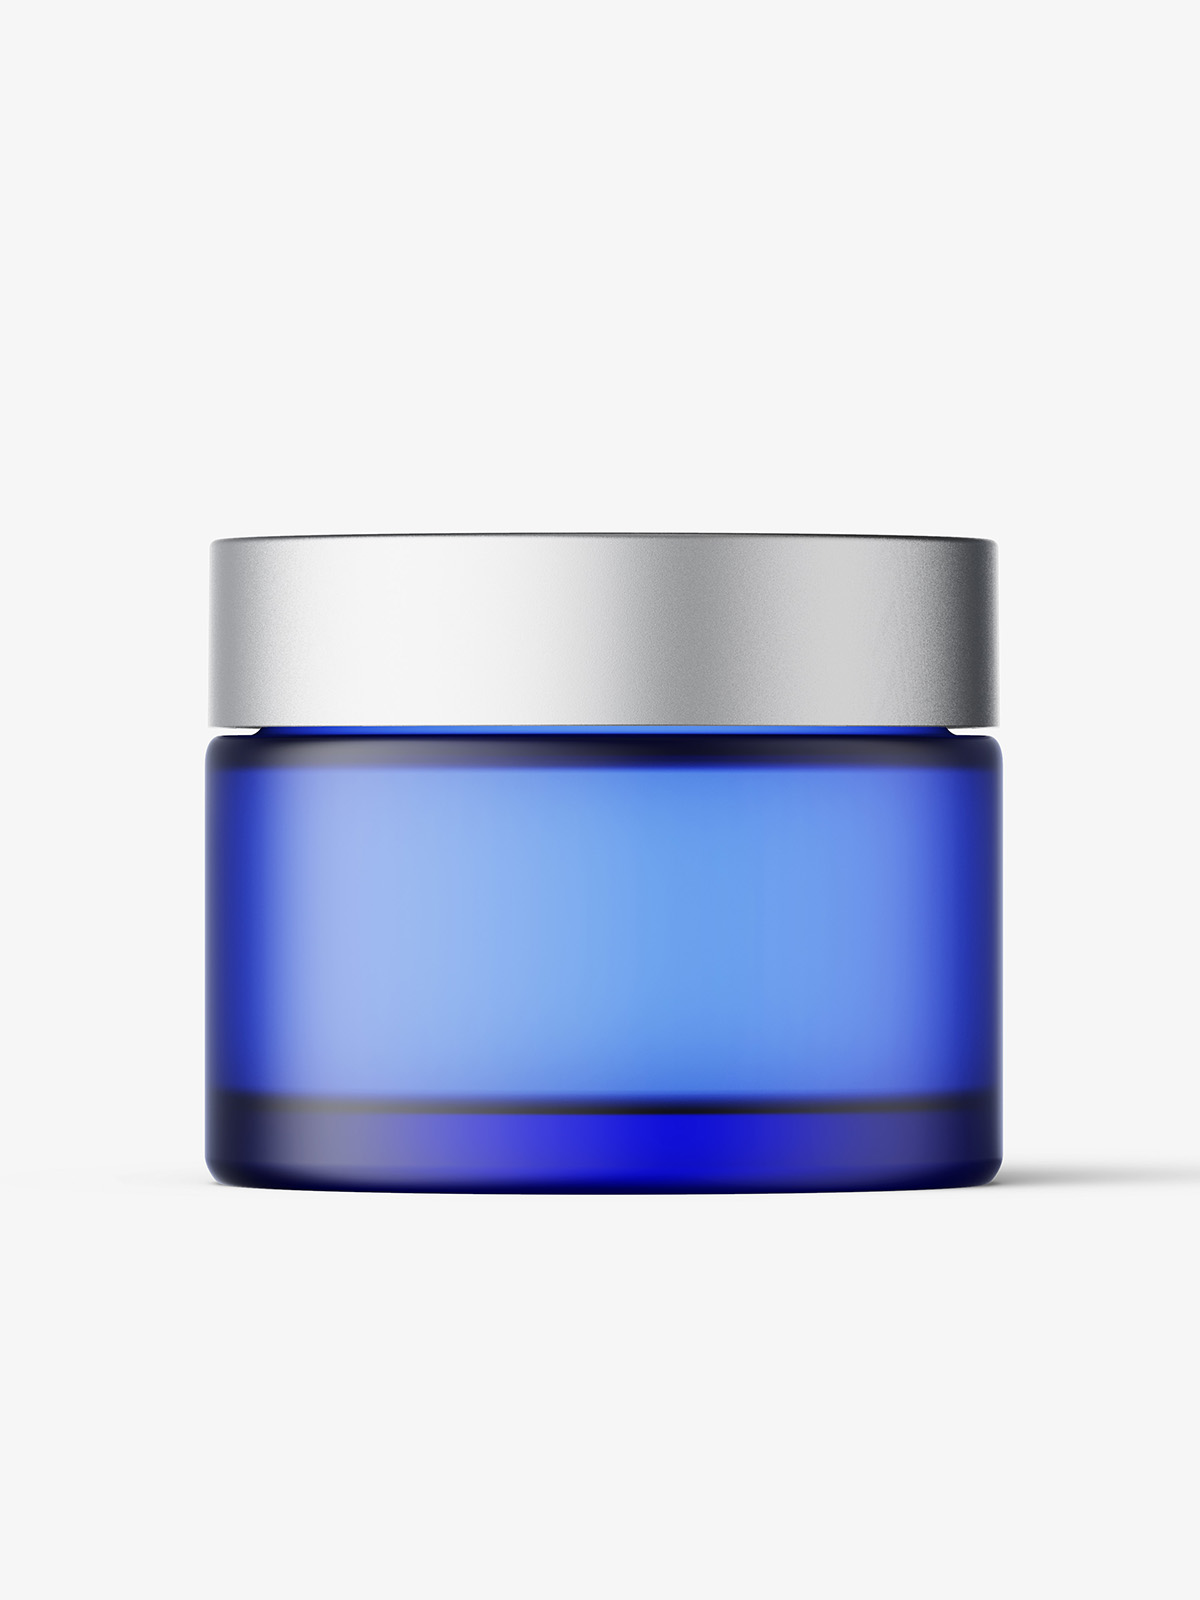 Download Frosted blue cosmetic jar with metallic cap mockup - Smarty Mockups